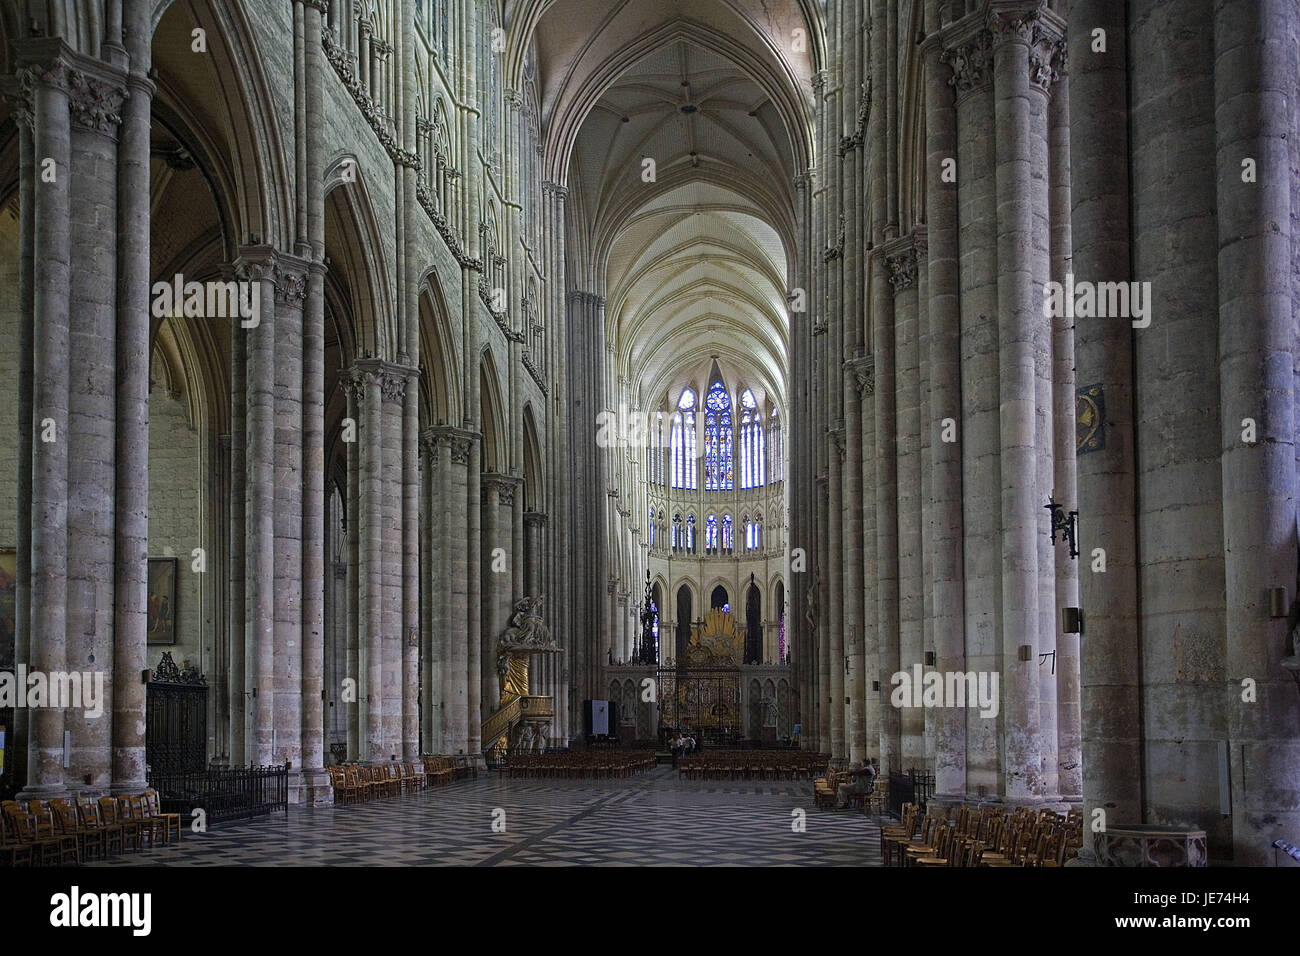 France, Picardy, Amiens, cathedral Notre lady, in 1220-1288, interior view, Northern France, basilica, church, structure, architecture, spike curves, pillars, central nave, chairs, seat opportunities, chancel, place of interest, landmark, UNESCO-world cultural heritage, icon, faith, religion, Christianity, spirituality, Stock Photo